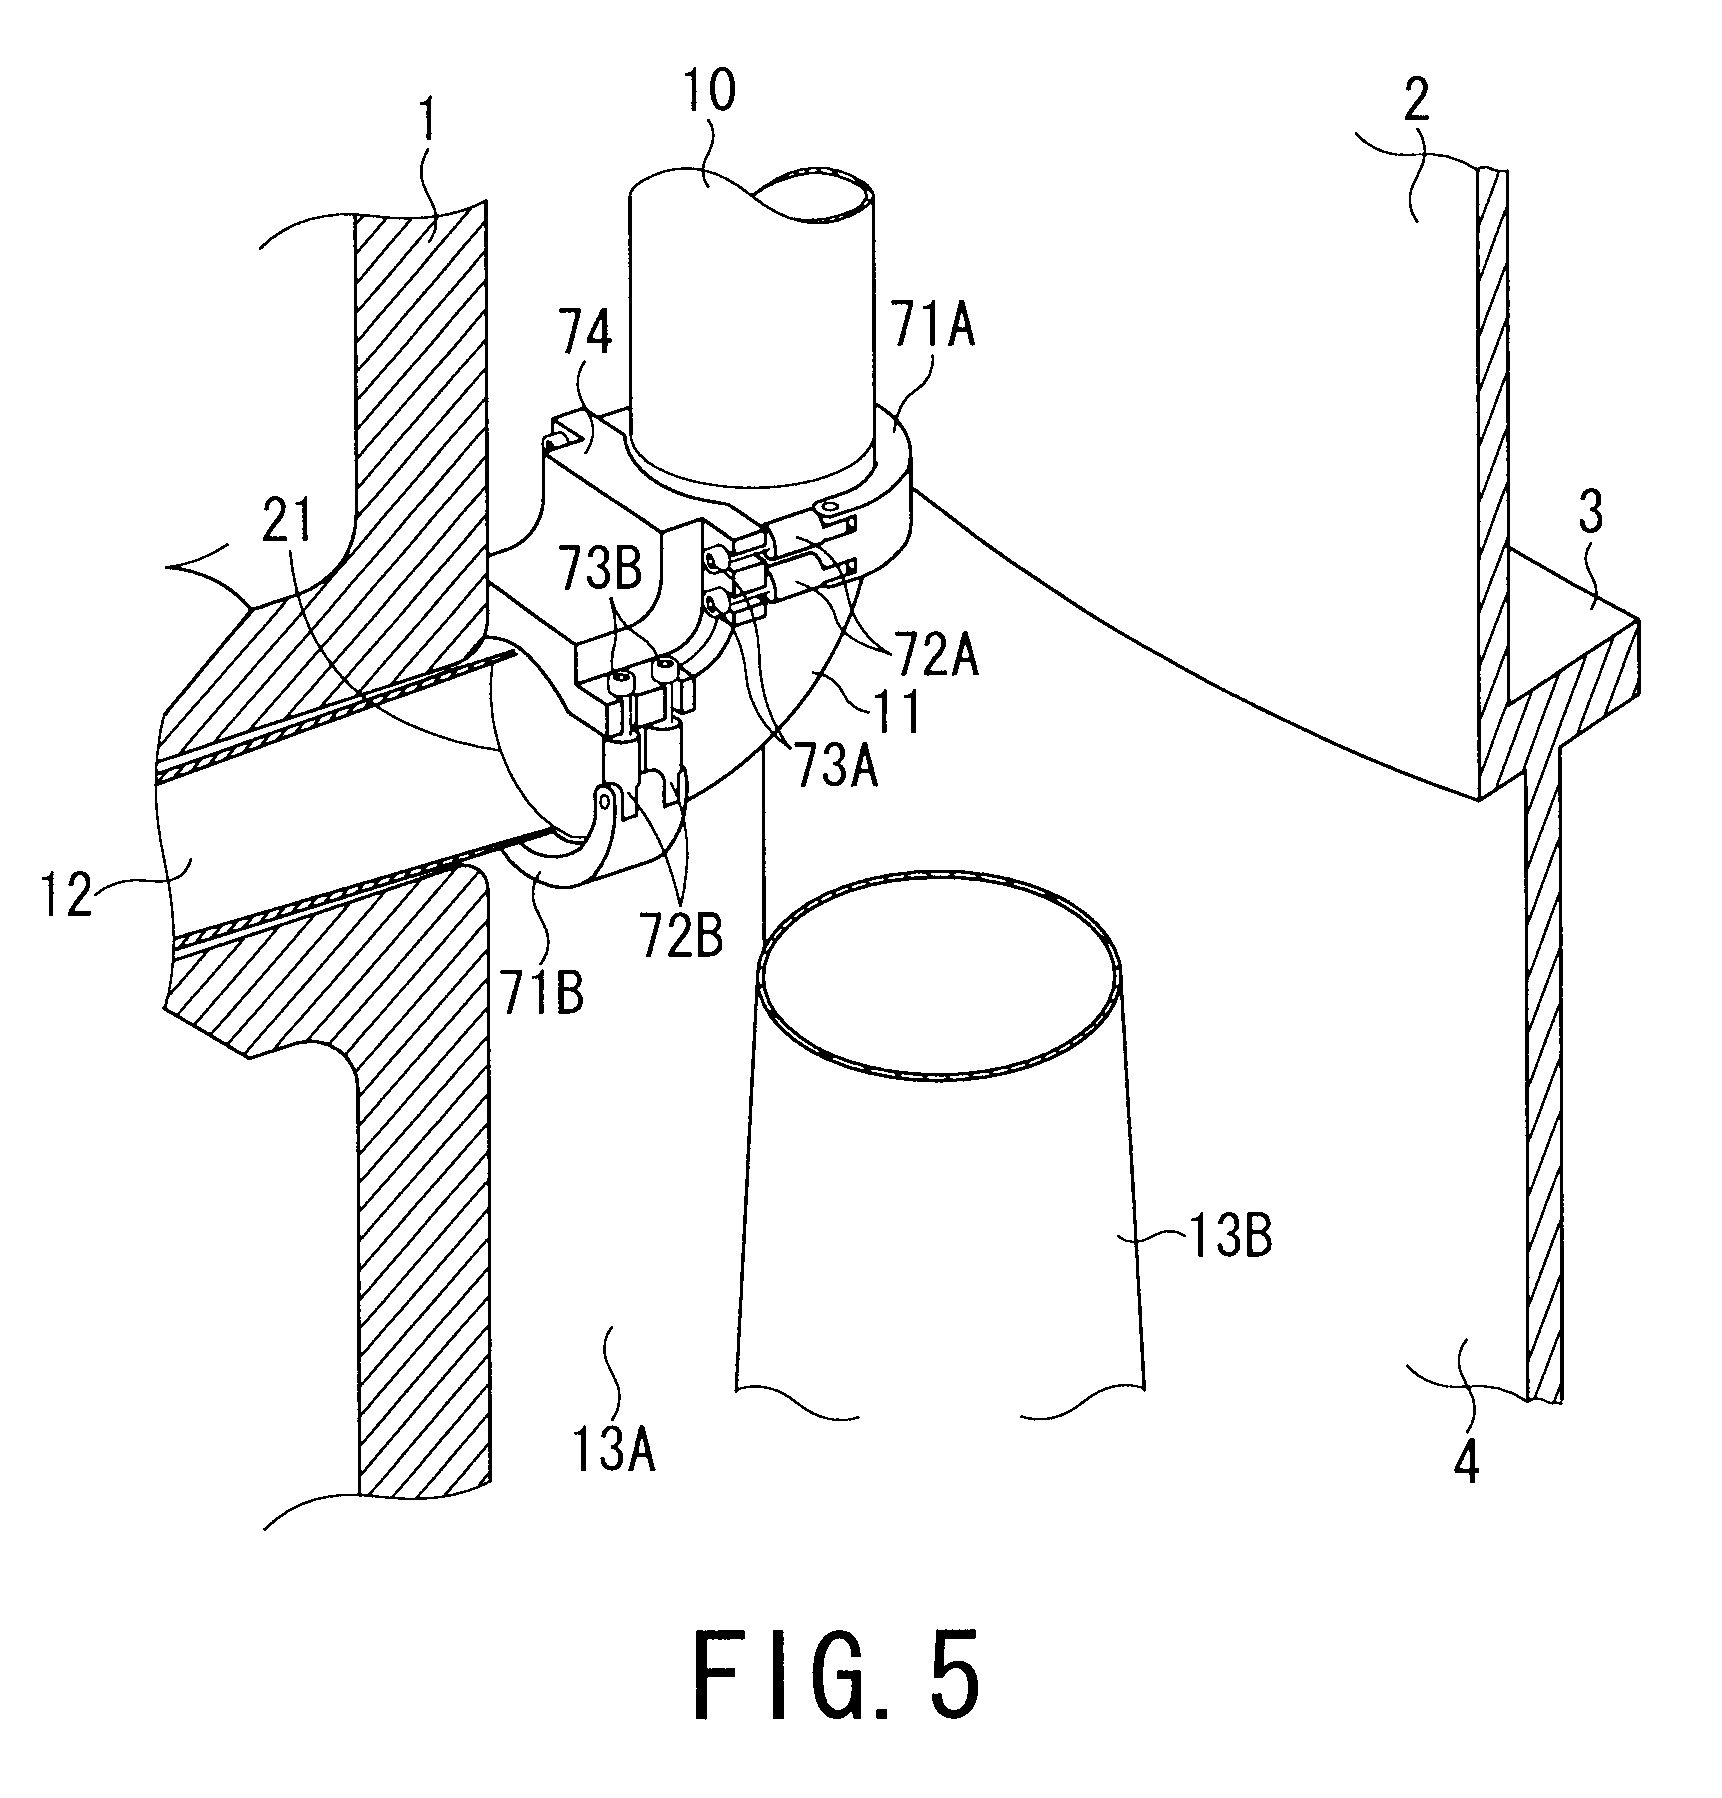 Apparatus and method for reinforcing jet pump riser